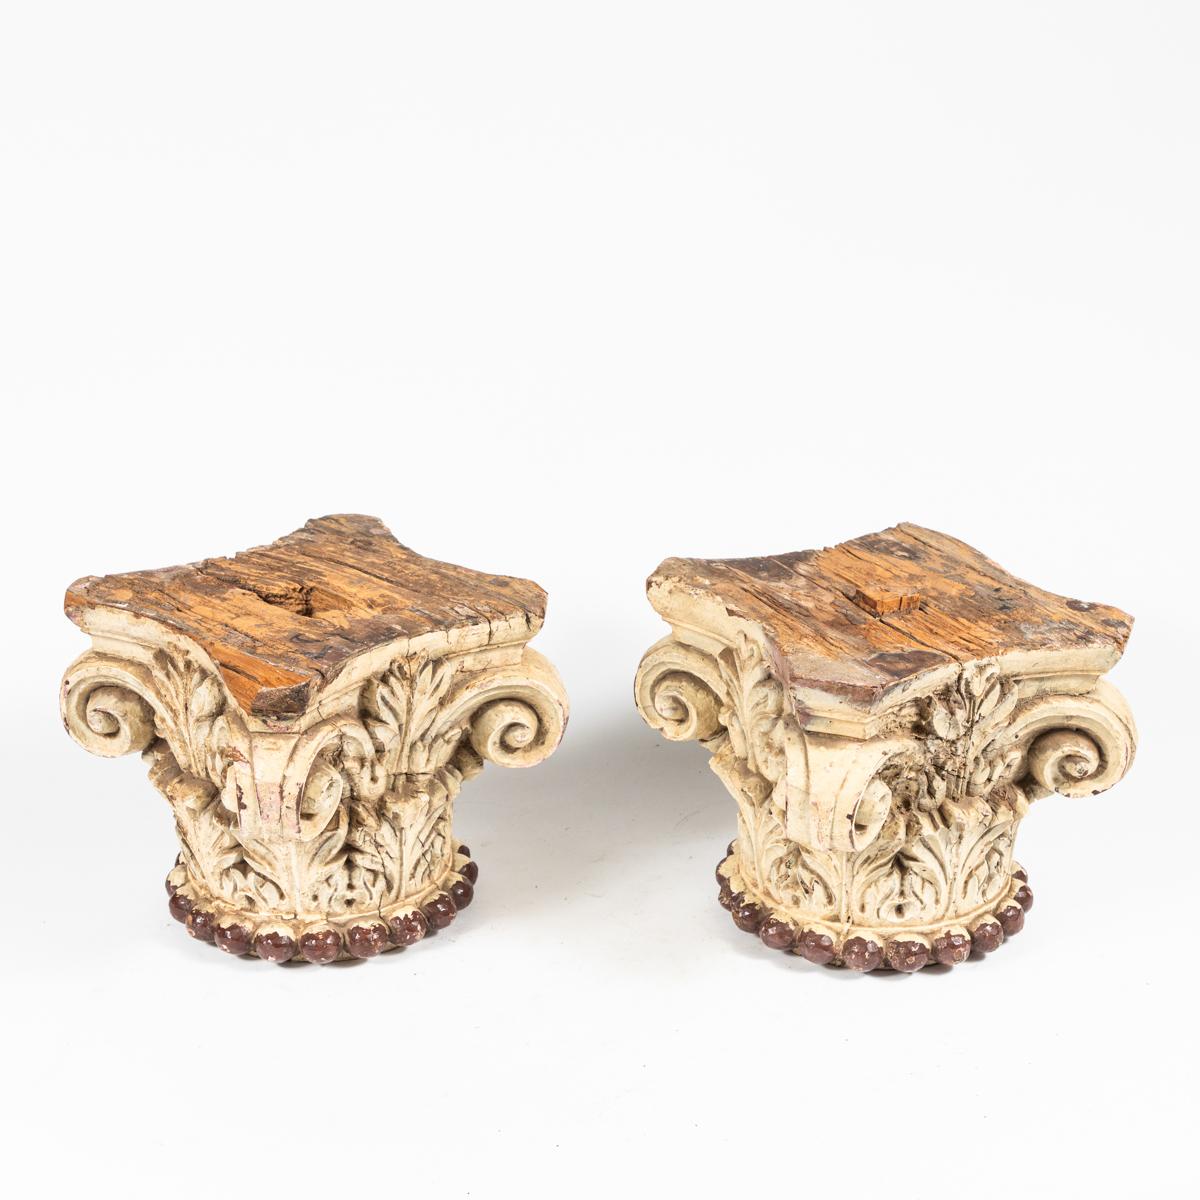 Pair of early 19th-century Italian ivory painted wood capitals. Originally used to frame a set of composite-style columns, these beautiful architectural elements would be great as sculptures. With a beautifully aged patina and attenuated floral